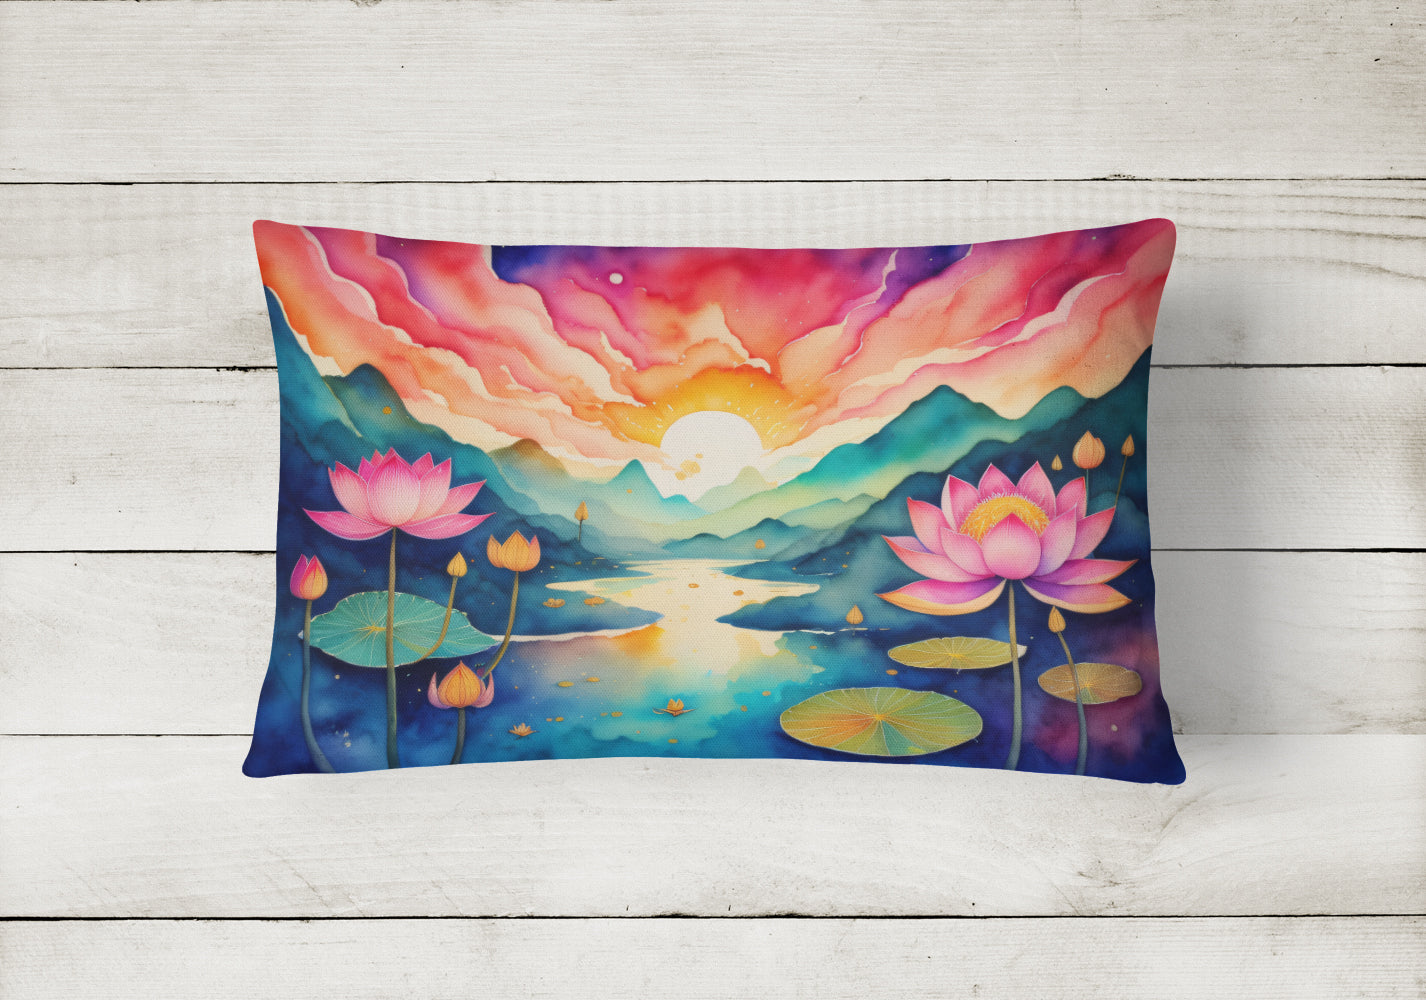 Buy this Lotus in Color Fabric Decorative Pillow